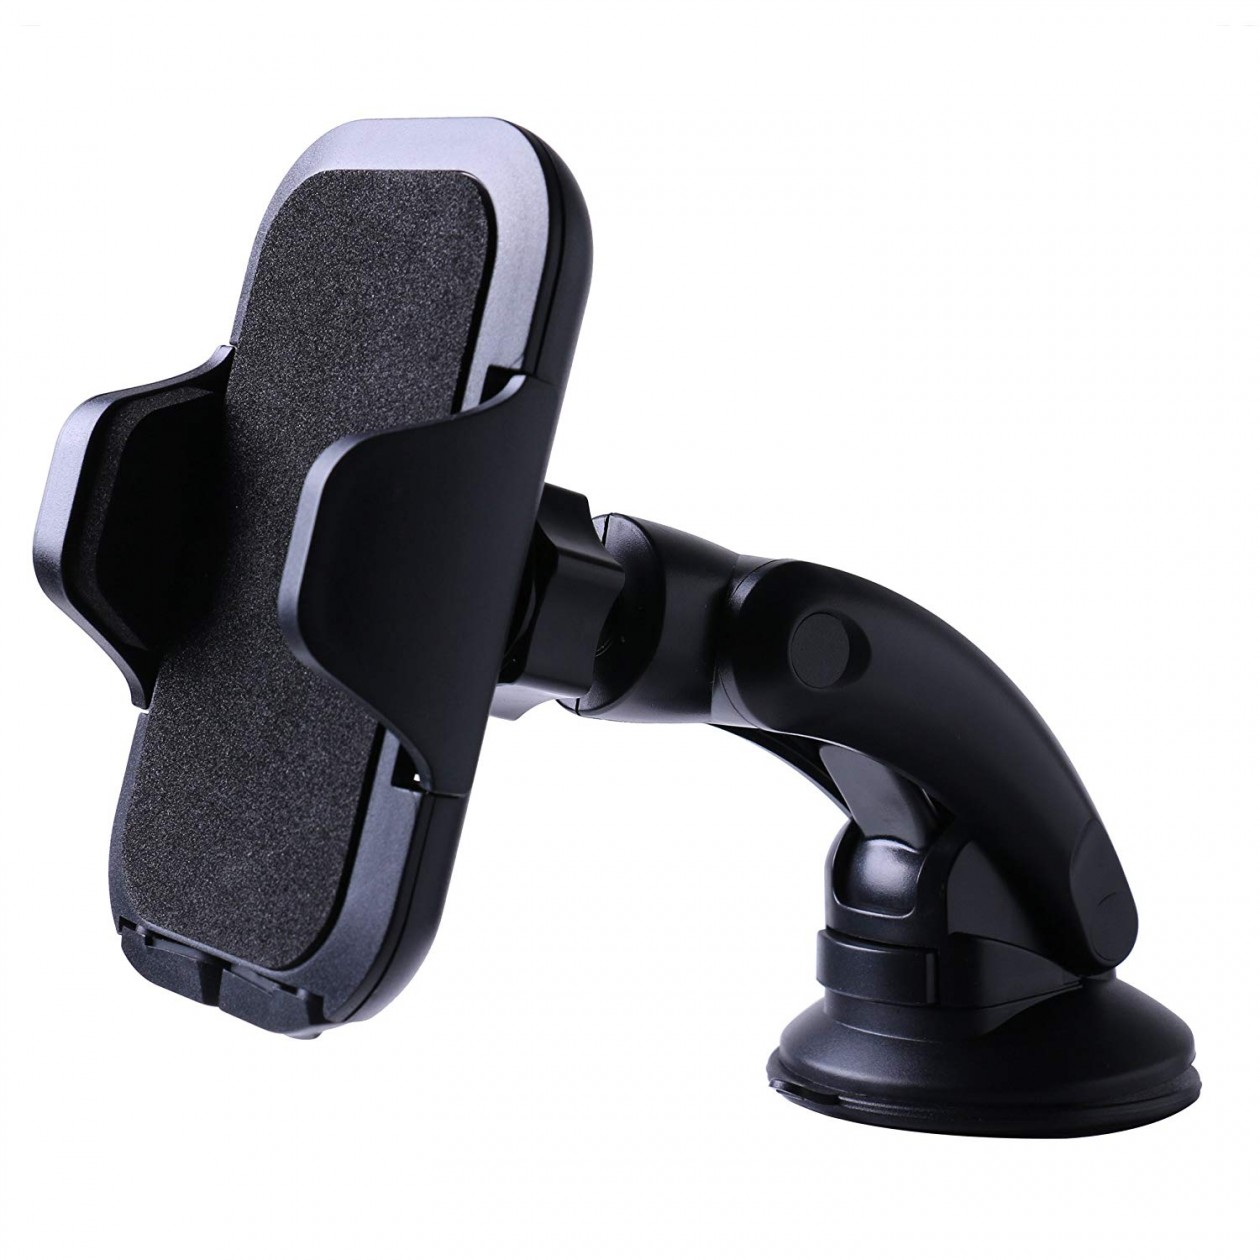 Universal Phone Mount Adjustable Phone Cradle with Strong Sticky Gel Pad for Mobiles